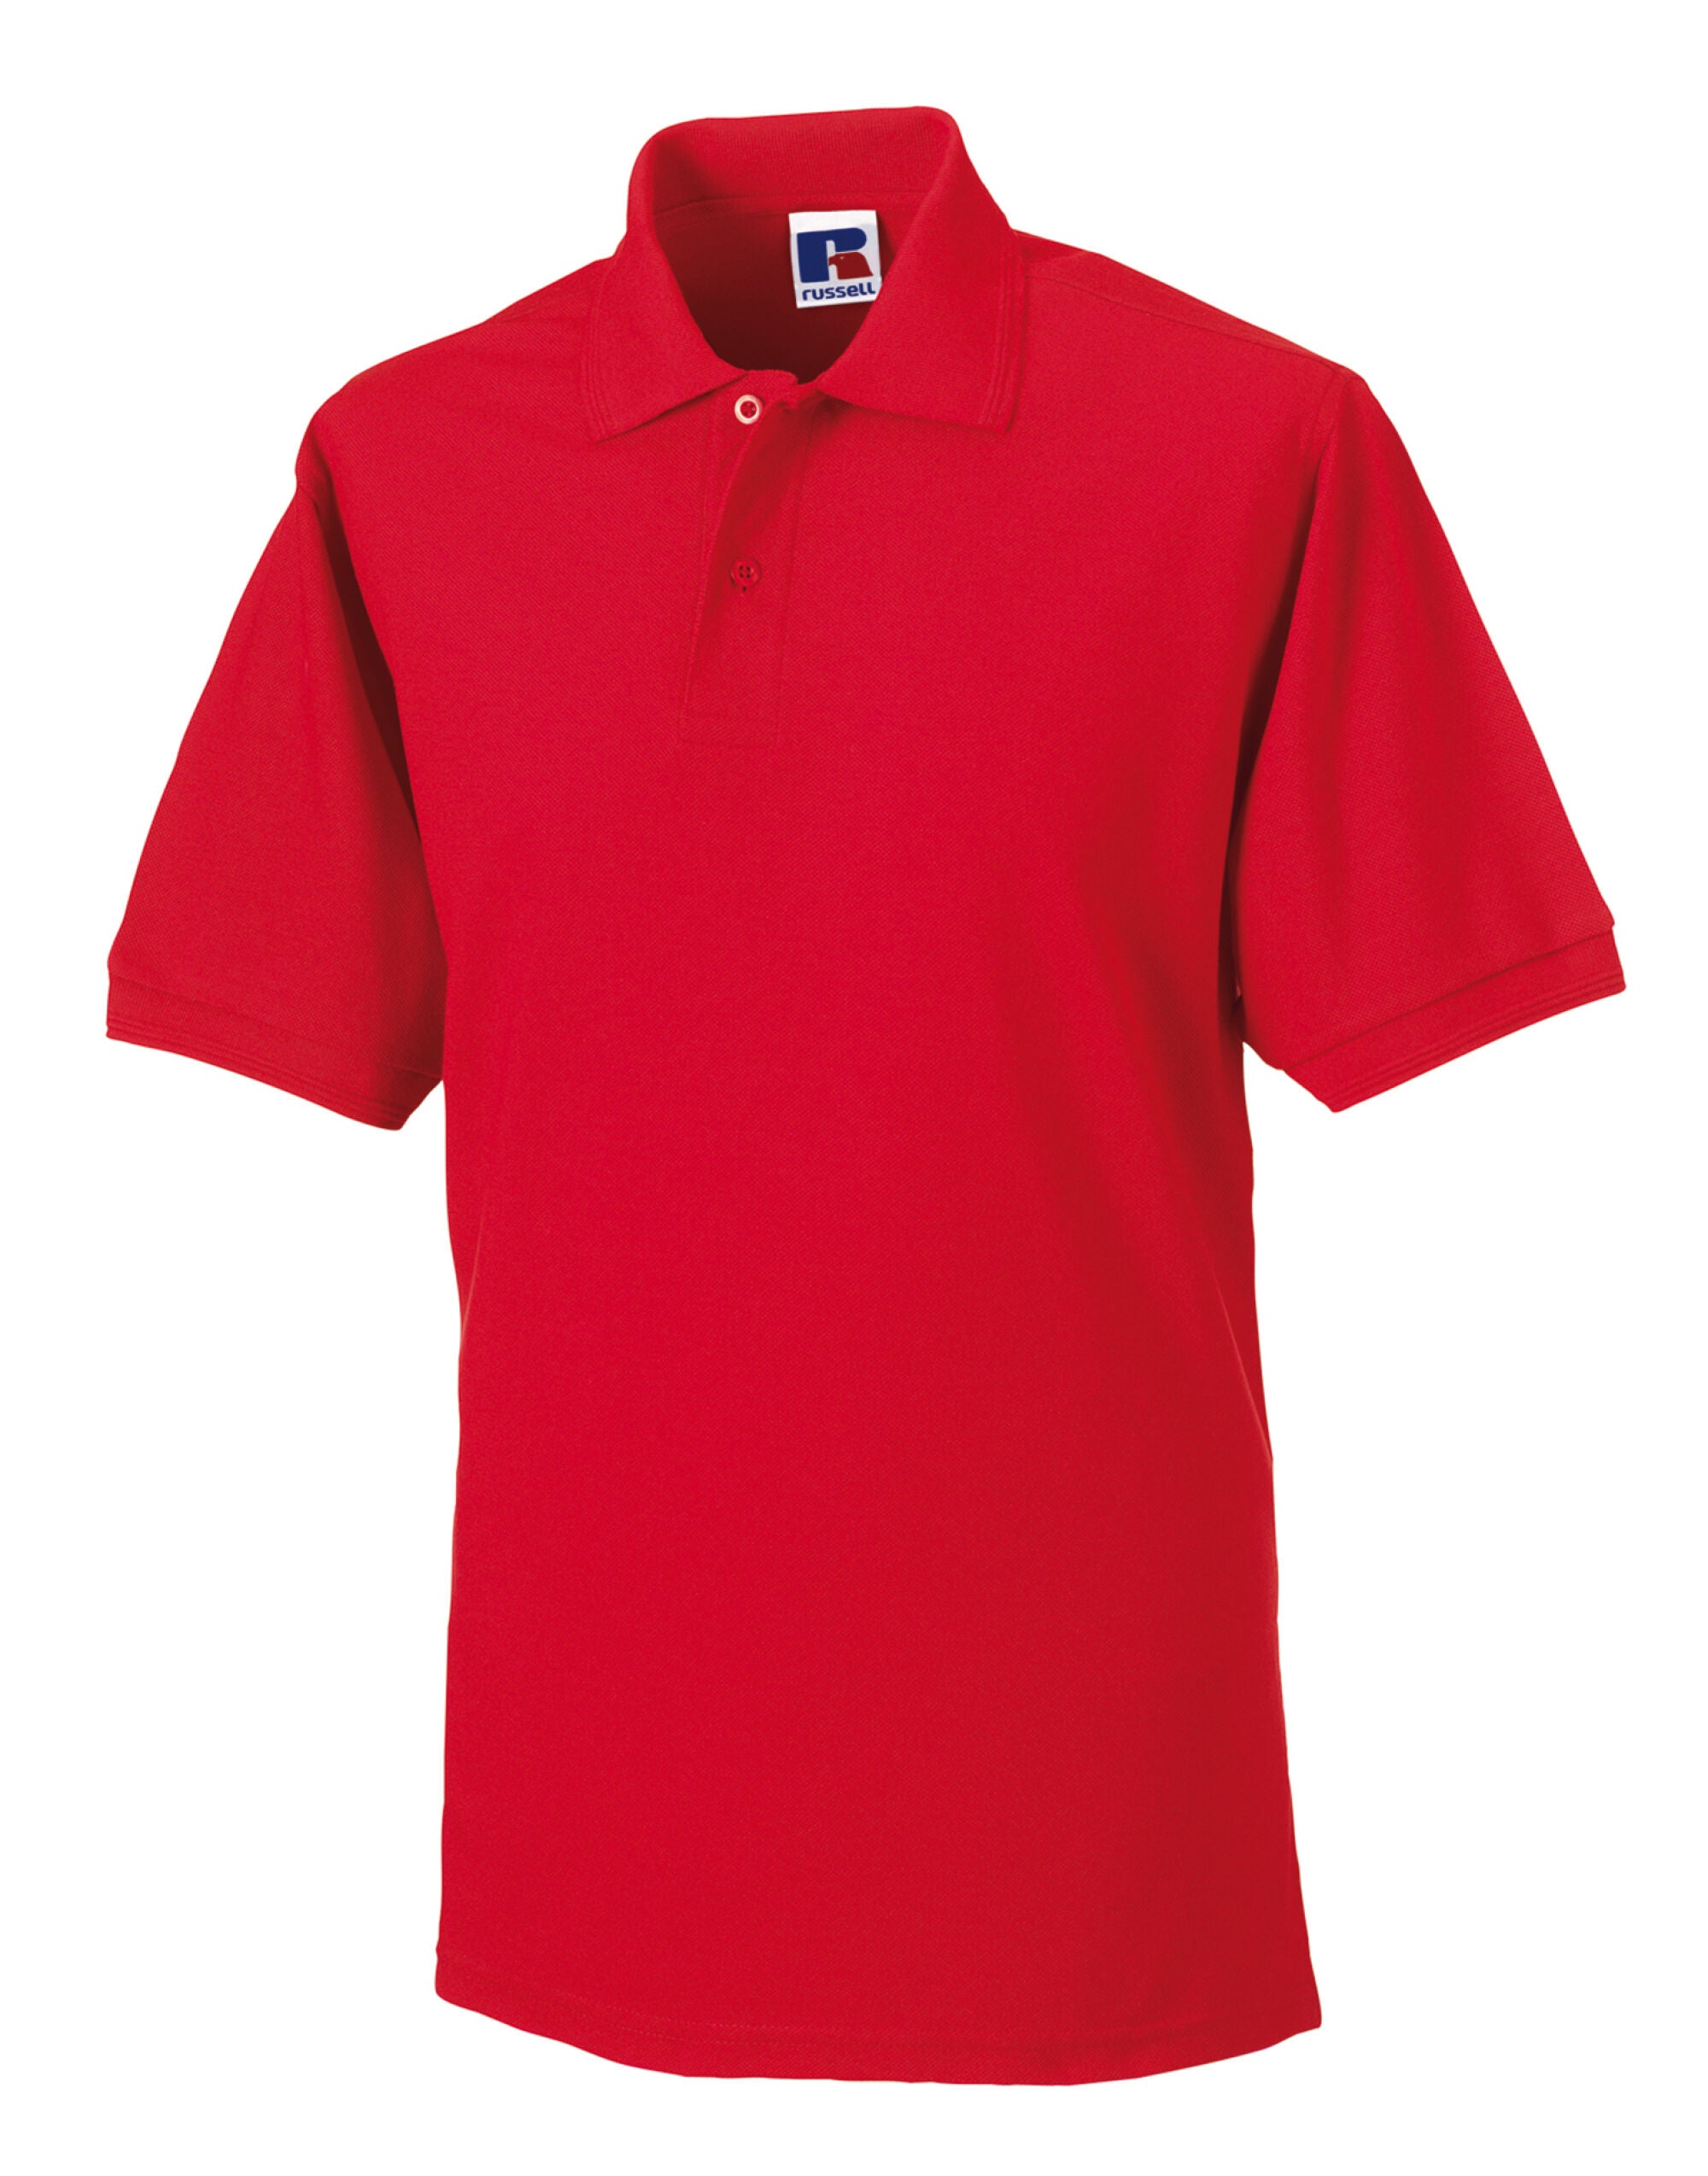 Russell Hardwearing Polycotton Polo The hardwearing, (almost) indestructible all-round is smarter choice (599M)